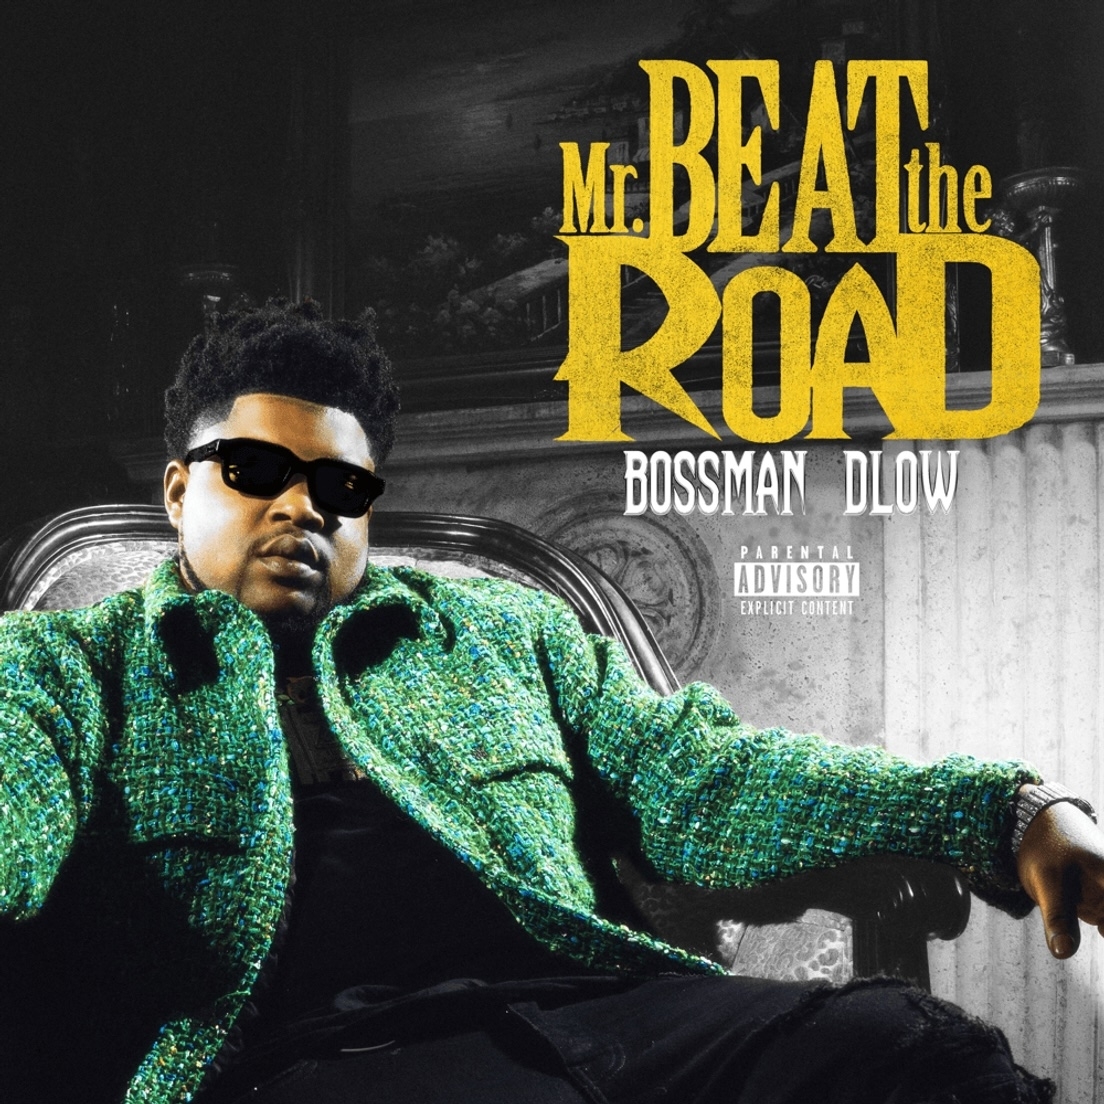 Bossman Dlow&#x27;s &quot;Mr. Beat the Road&quot; album cover features him seated in a chair wearing sunglasses and a textured jacket